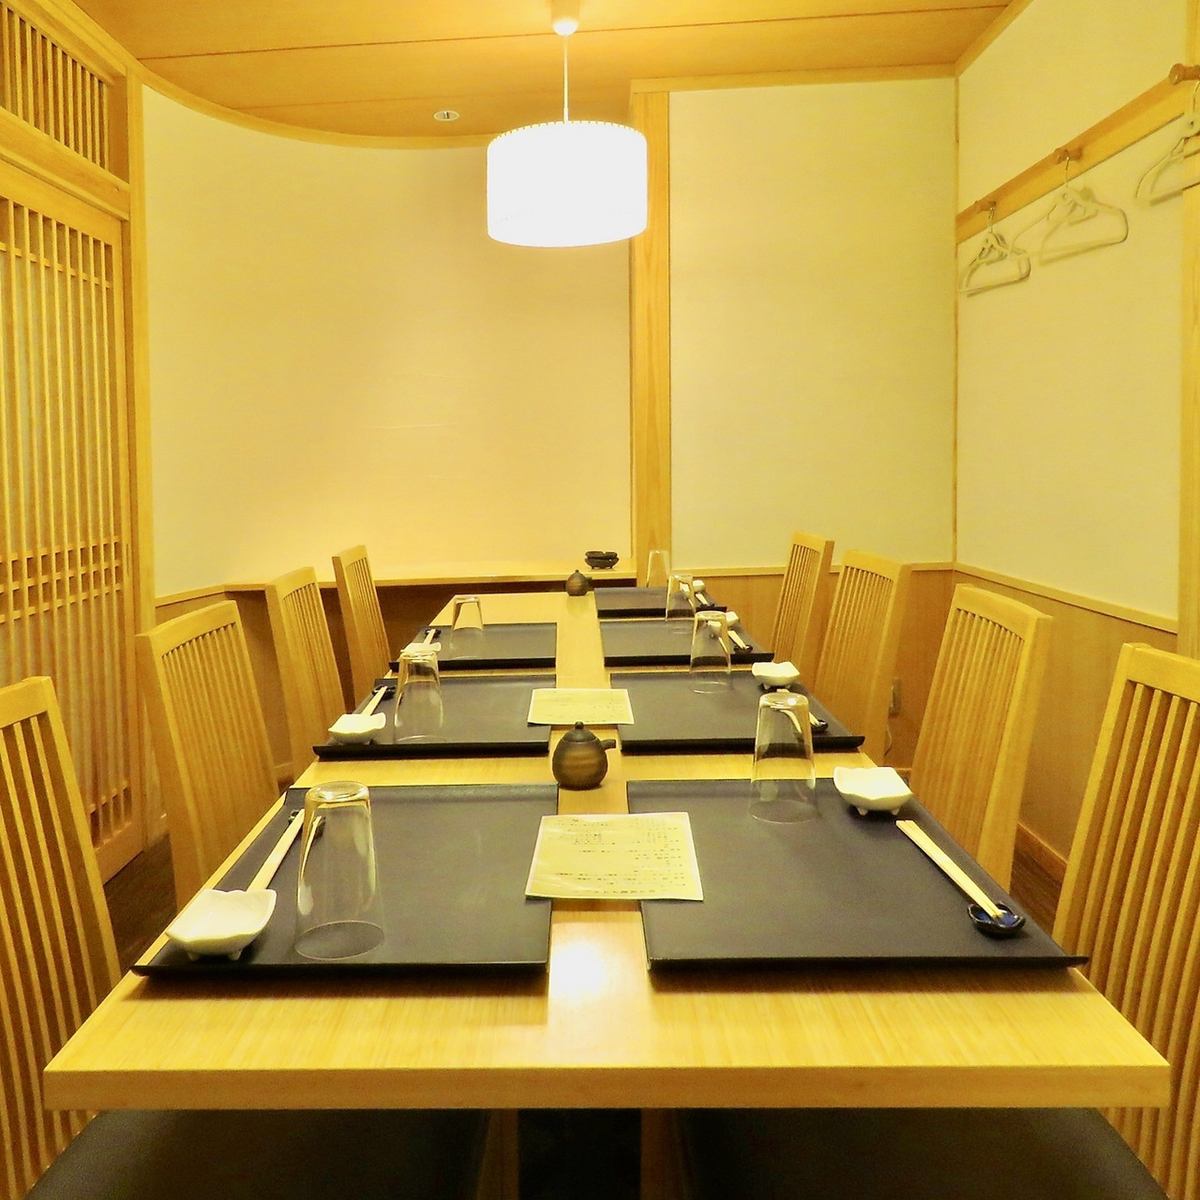 We have private rooms that are perfect for sudden entertainment and lunch meetings.